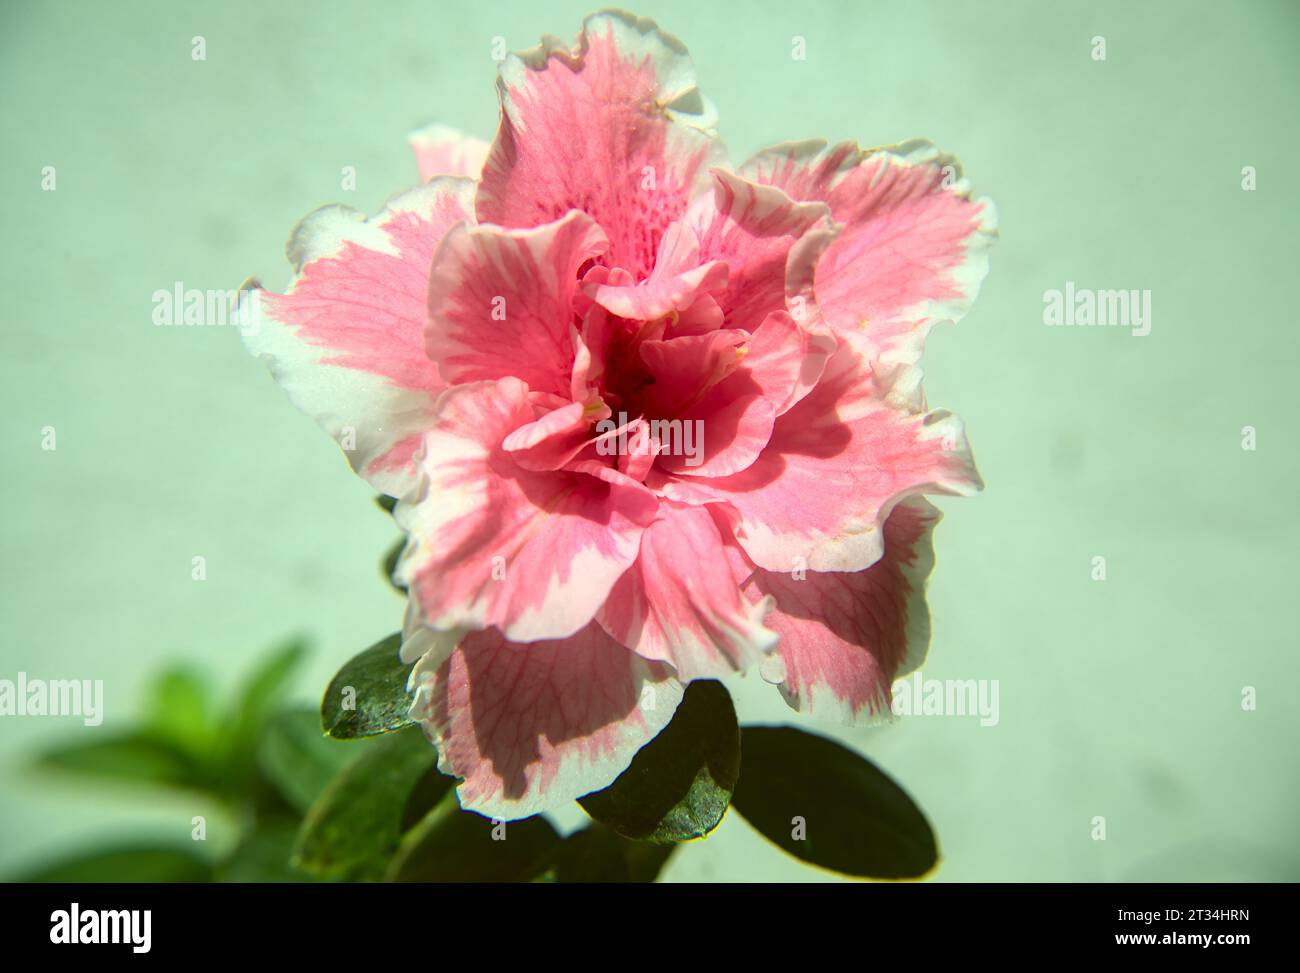 Azalea rhododendron in bloom seen up close Stock Photo